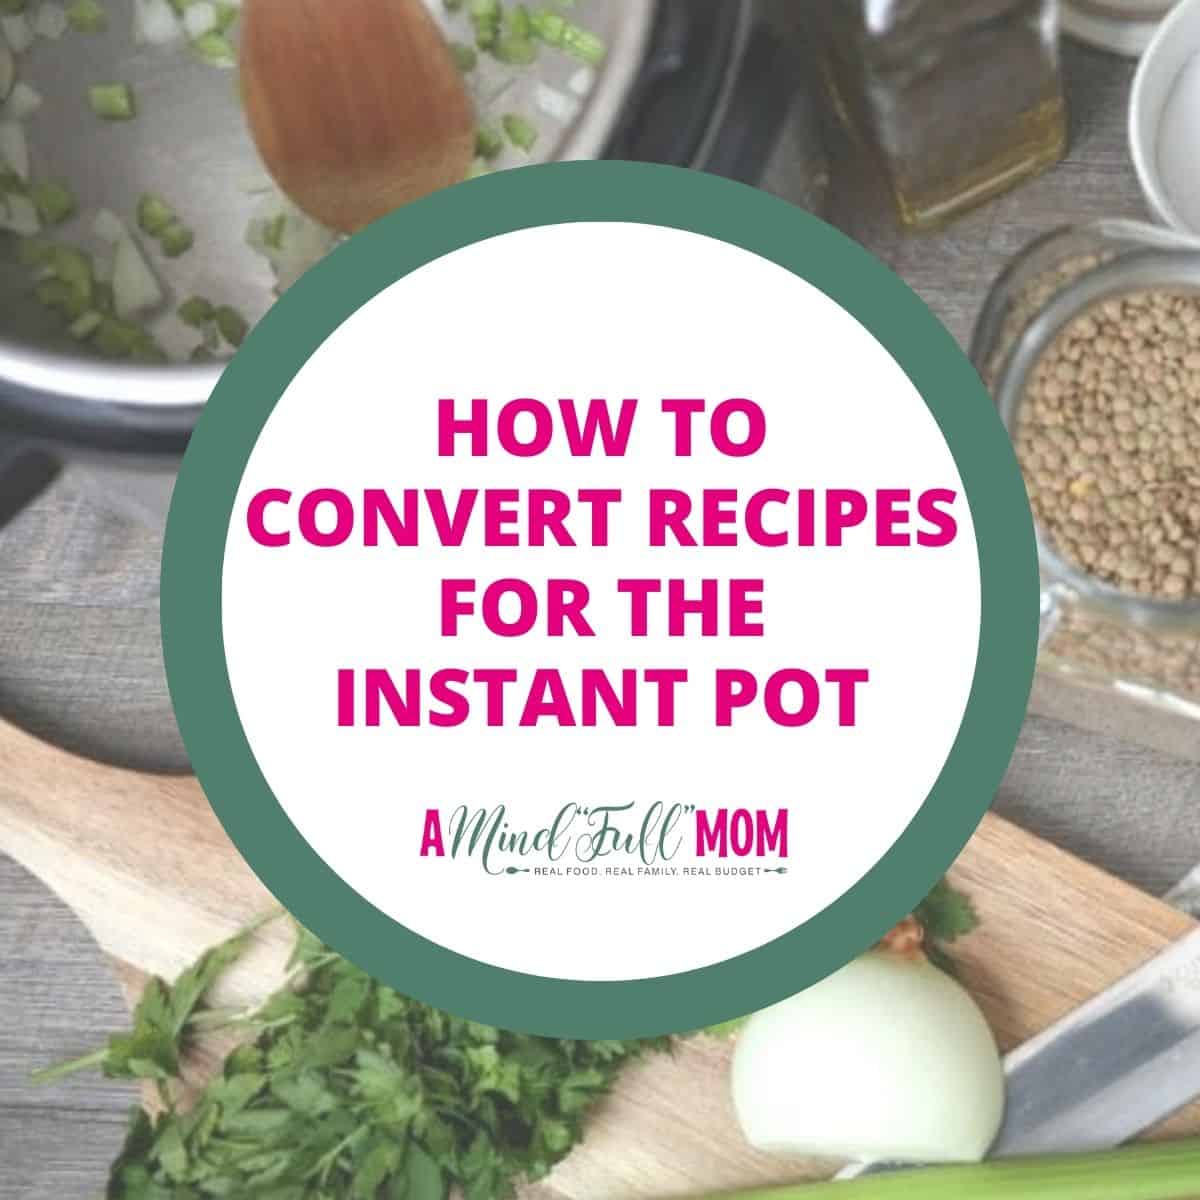 Picture of Instant pot with ingredients and recipe card in background with text overlay that reads how to convert recipes for the Instant Pot.